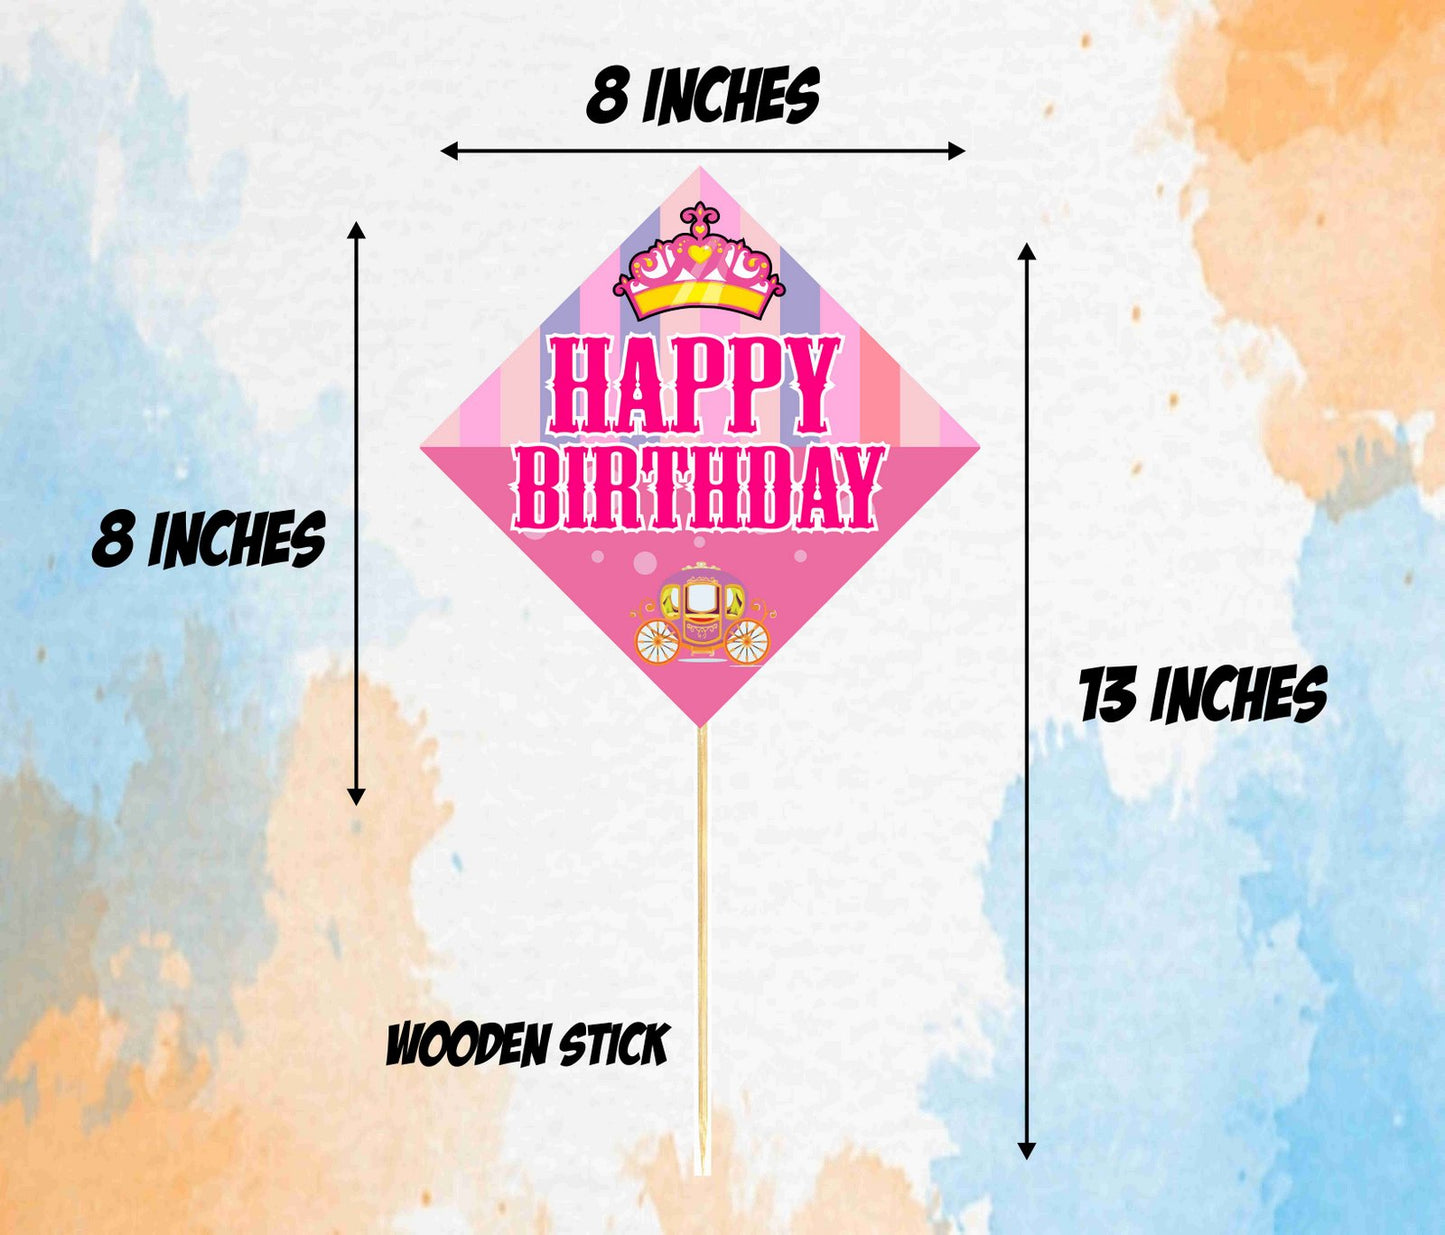 Princess Theme Birthday Photo Booth Party Props Theme Birthday Party Decoration, Birthday Photo Booth Party Item for Adults and Kids